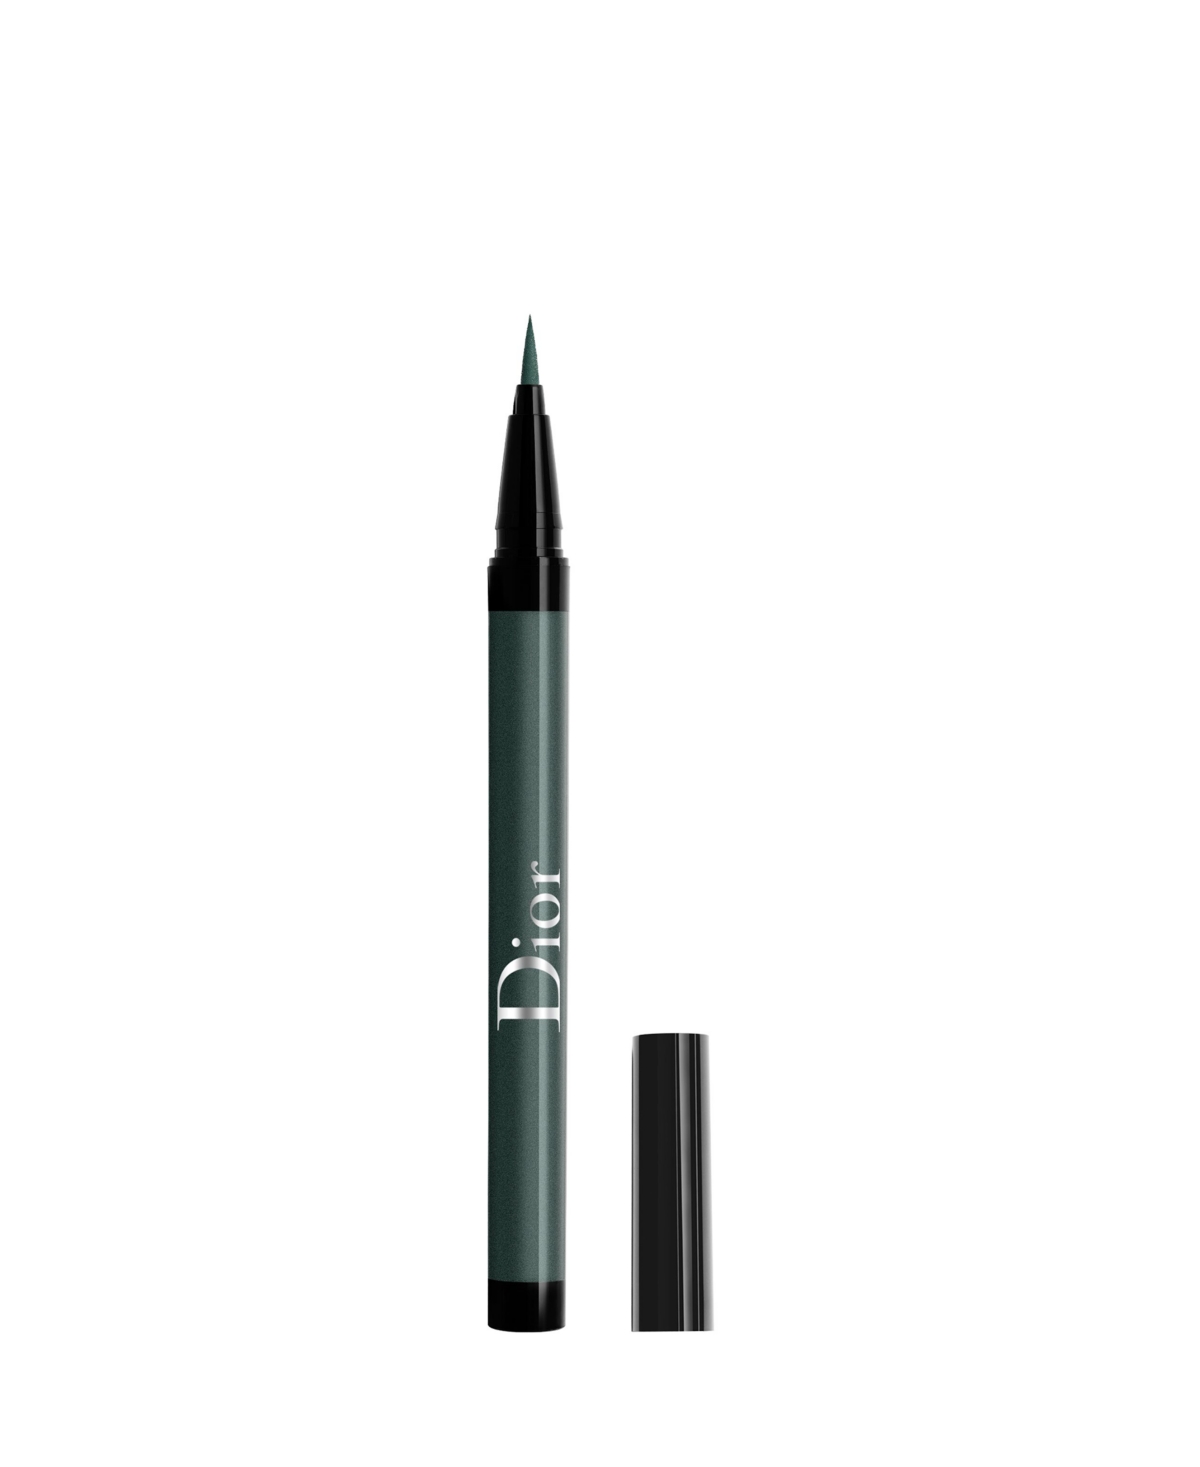 Dior Show On Stage Waterproof Liquid Eyeliner In Pearly Emerald (a Pearly Emerald Green)